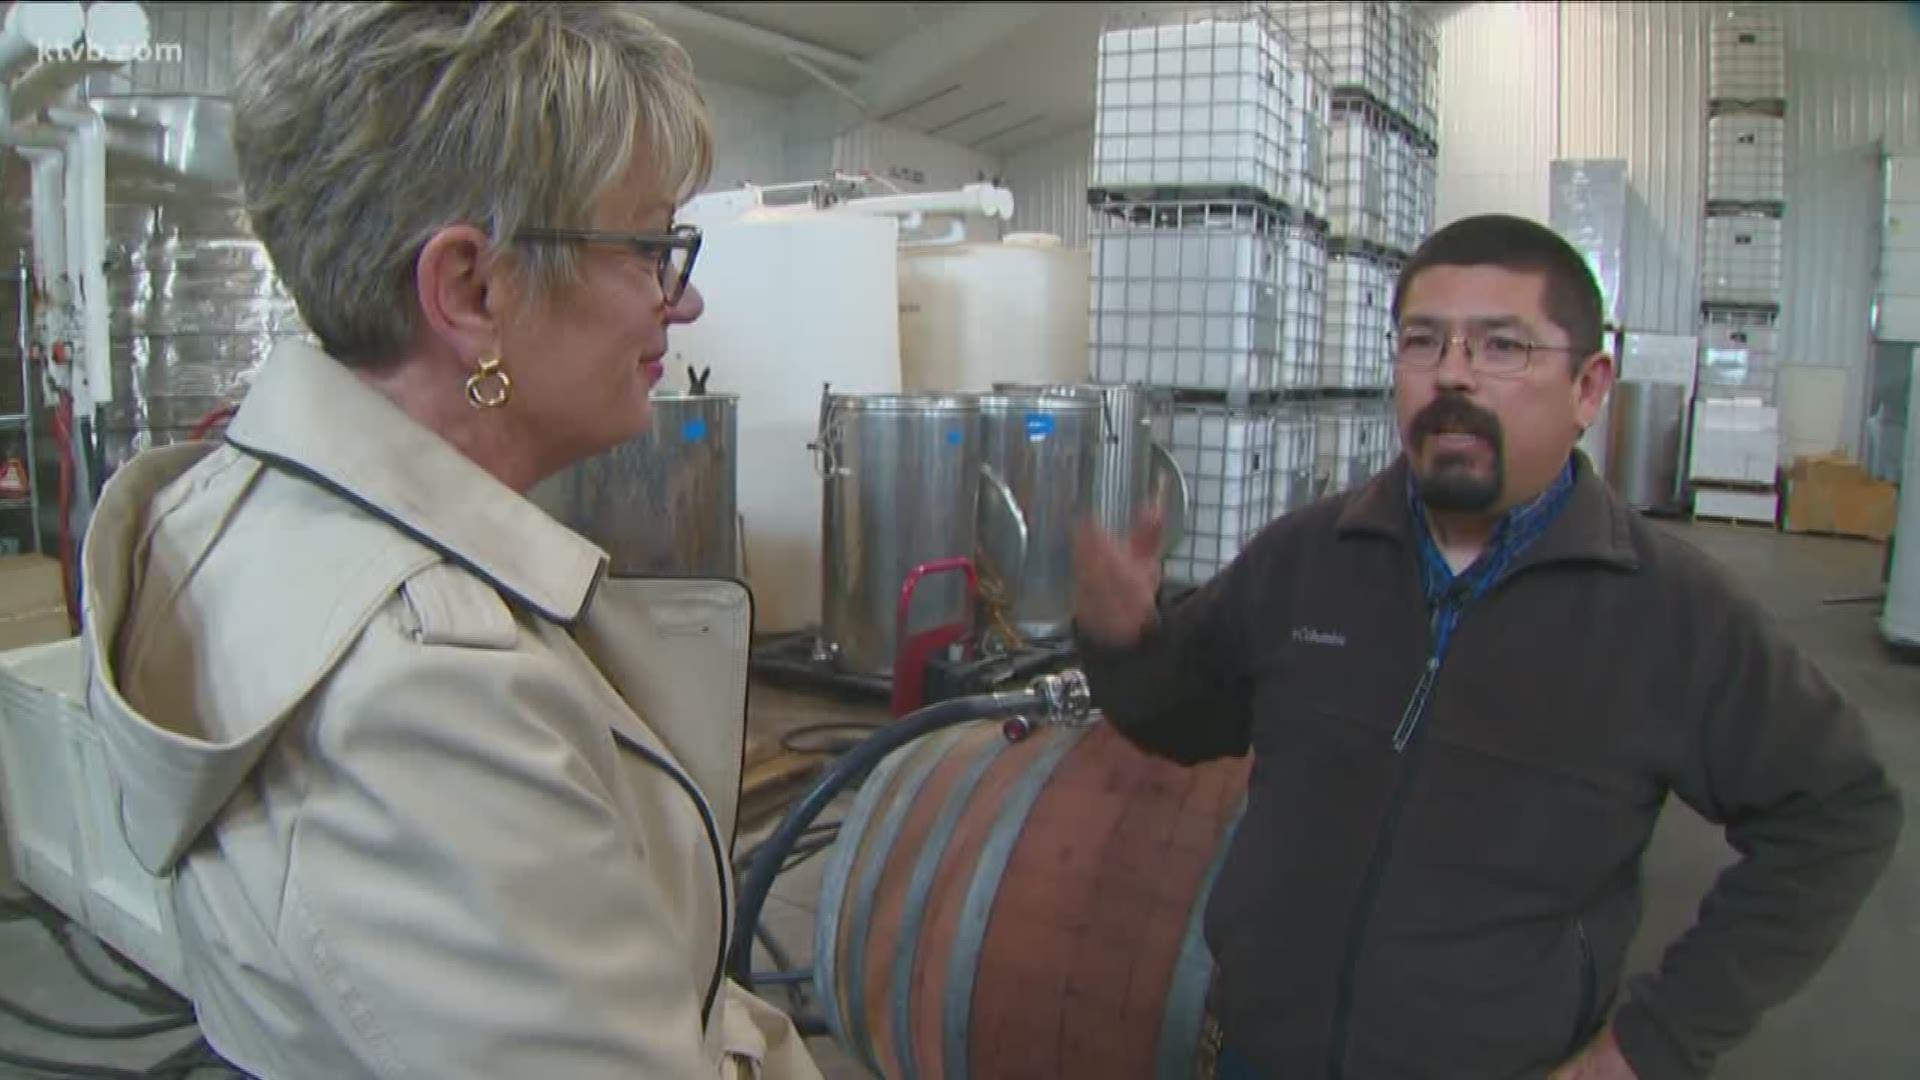 Dee Sarton travels to a local winery that is finding fans throughout the country.